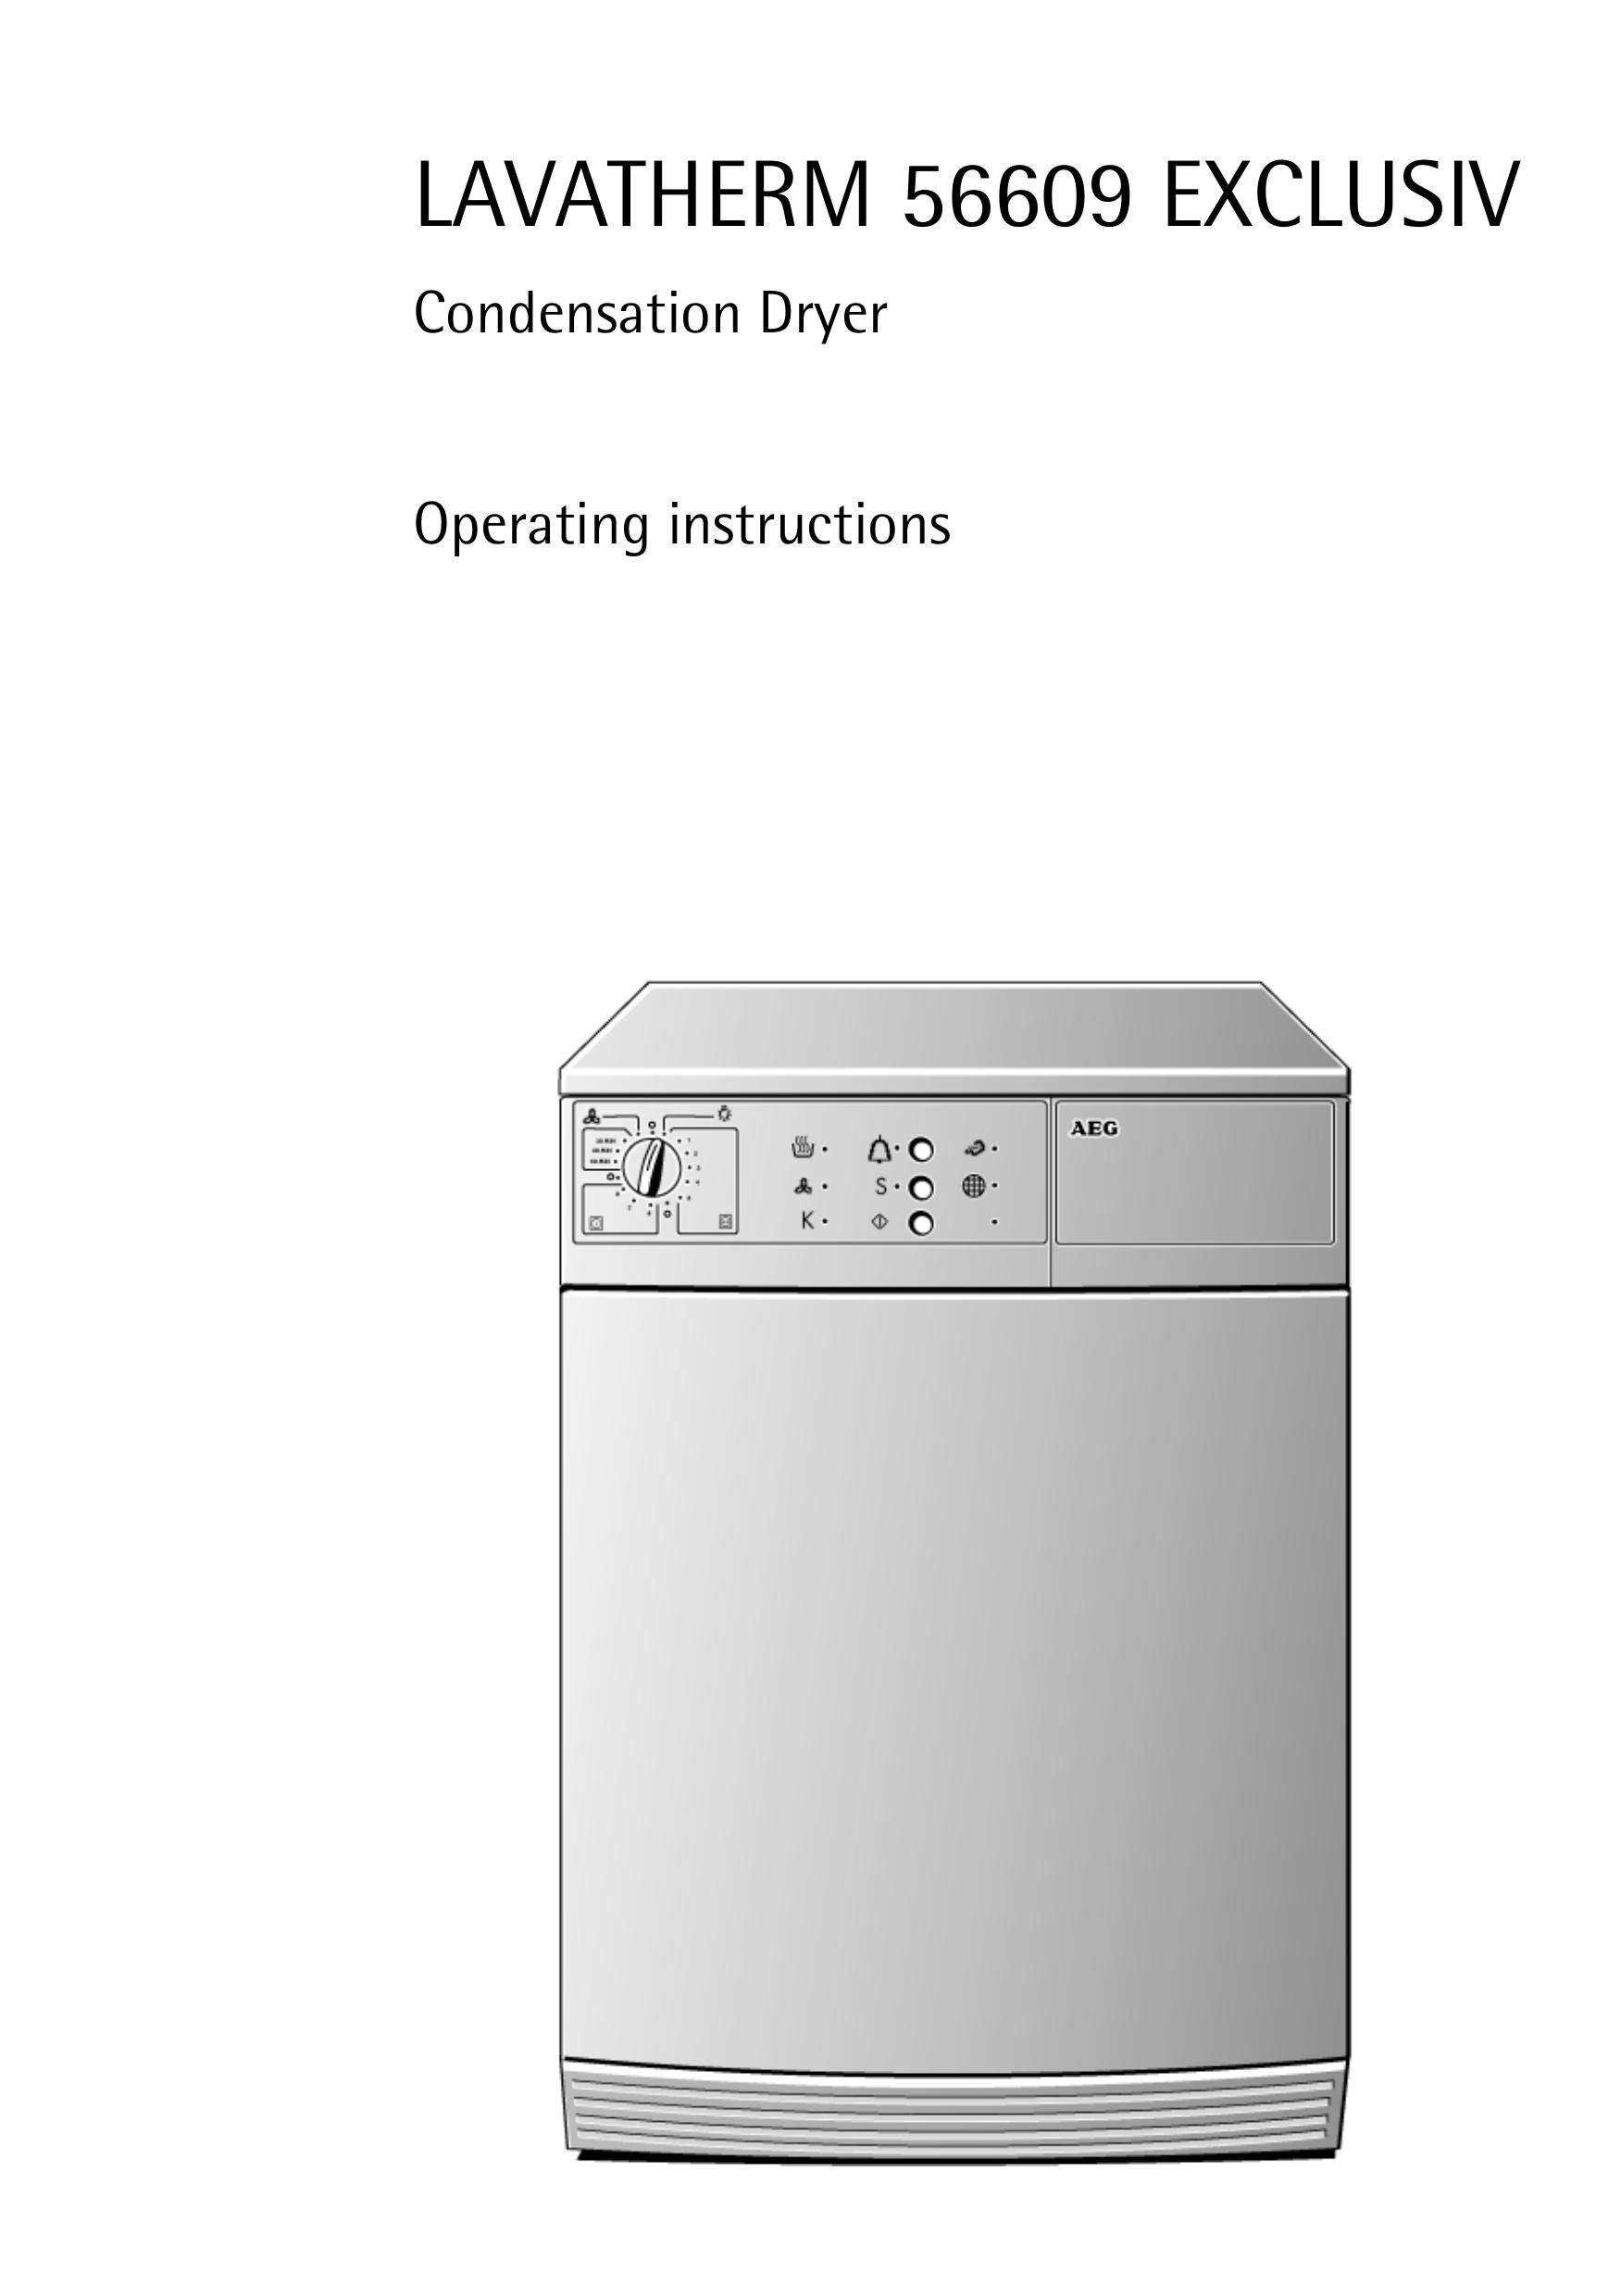 AEG 56609 Clothes Dryer User Manual (Page 1)